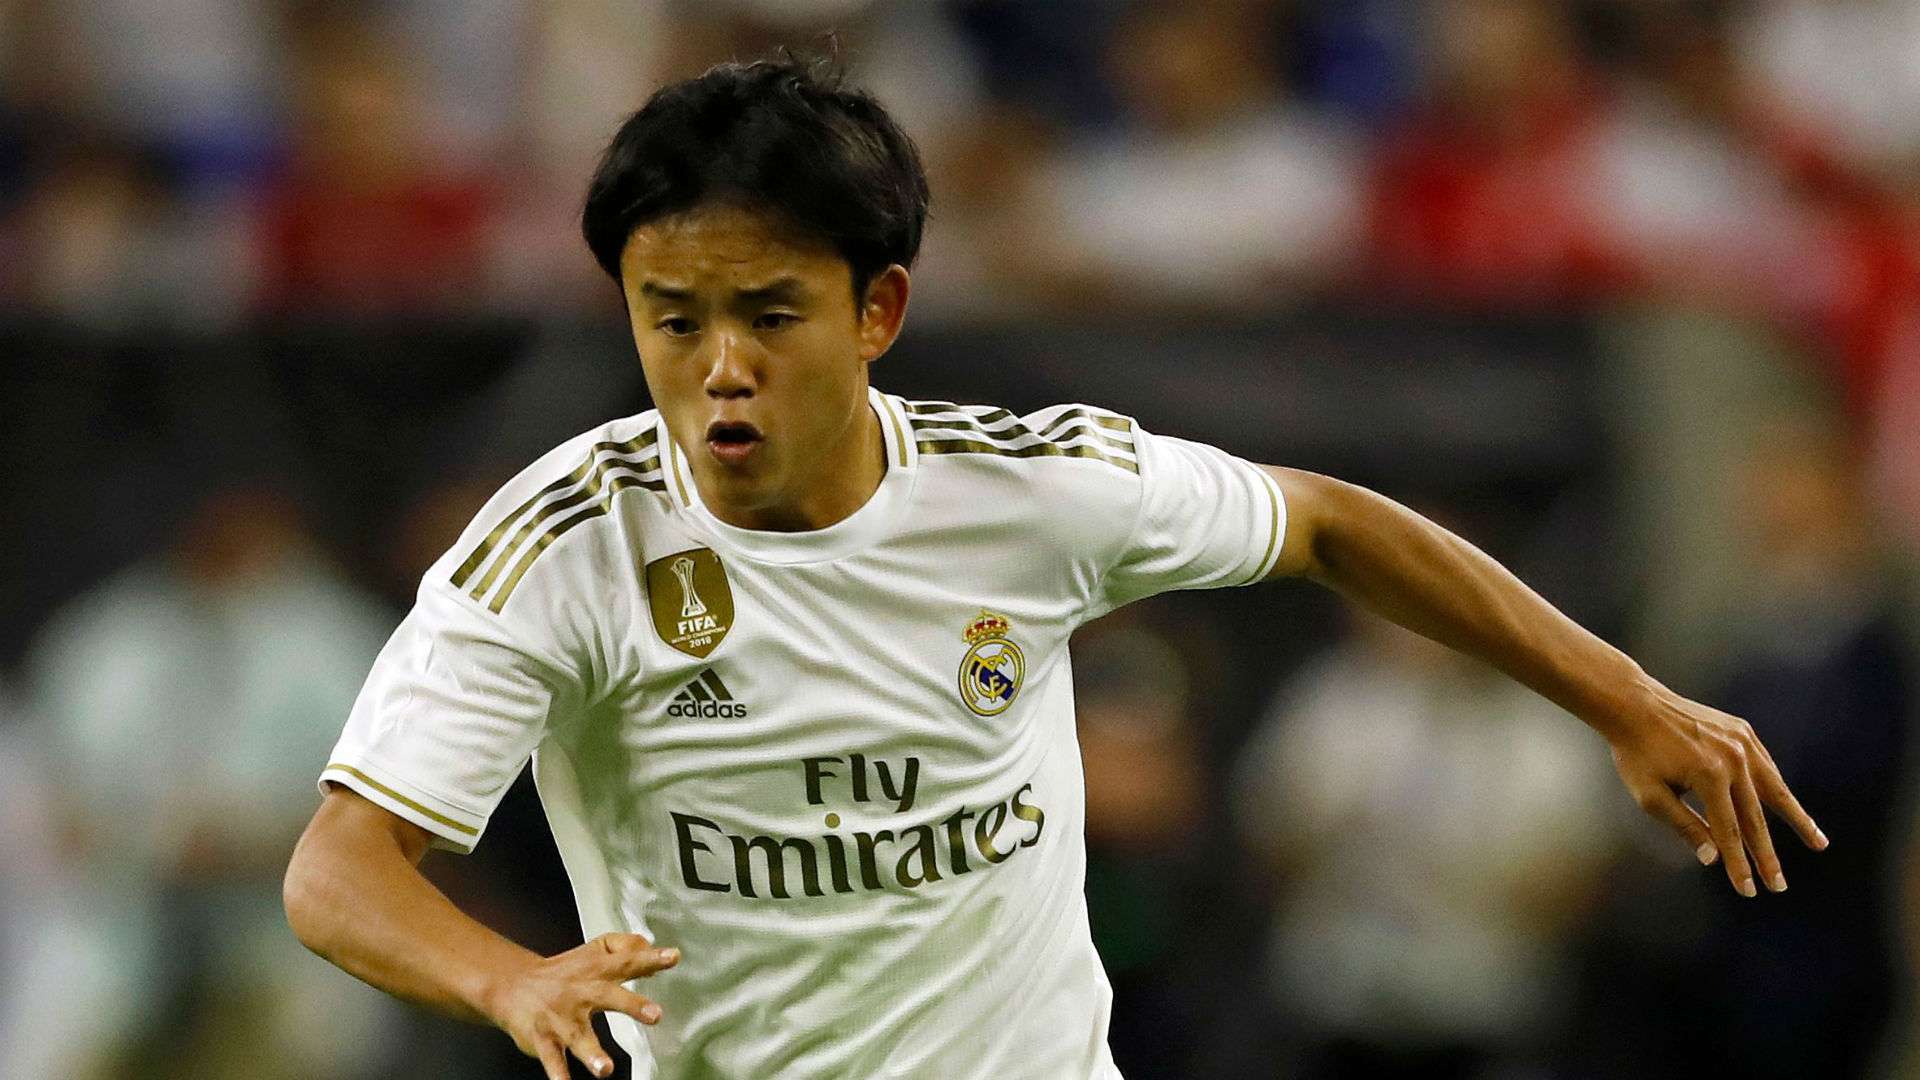 Transfer news: Takefusa Kubo knows nothing of Gareth Bale move that could open Real Madrid door for him